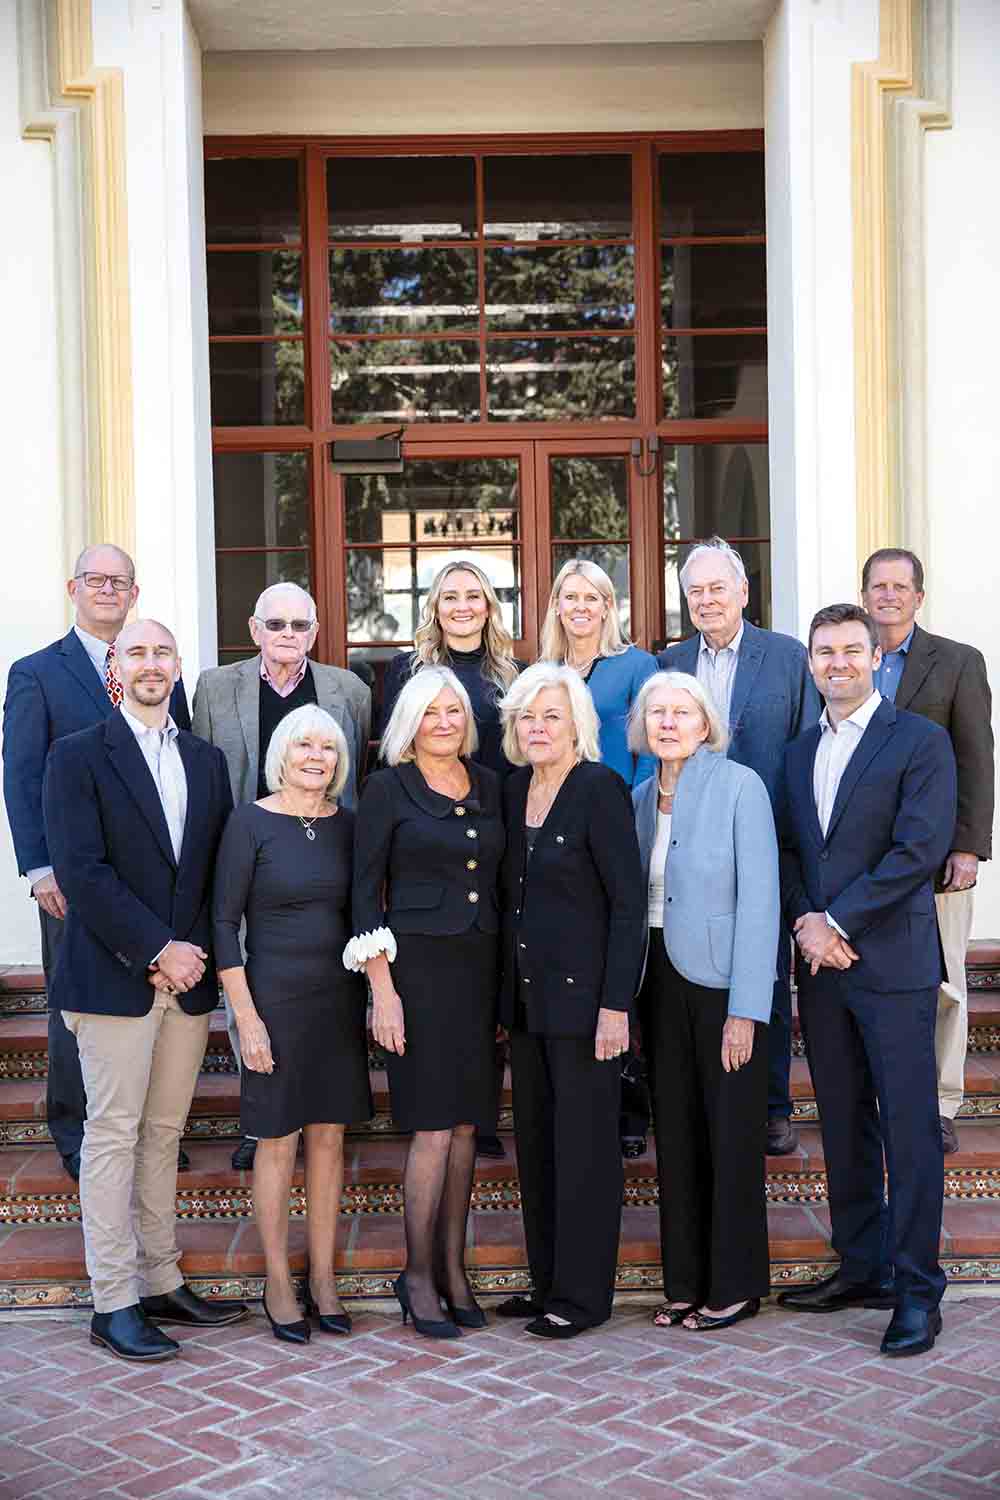 Smith family and board members representing the Martin V. and Martha K. Smith Foundation Front Row (left to right): Brando Pozzi, Vickie Pozzi, Cindi Daley, Margie Tegland, Toni Gardiner, and Nick Joseph Back Row (left to right): Steve Shinsky, Bob England, Kelly McWilliams, Stacy Cannon, Dick Faussett, and Doug Shaw